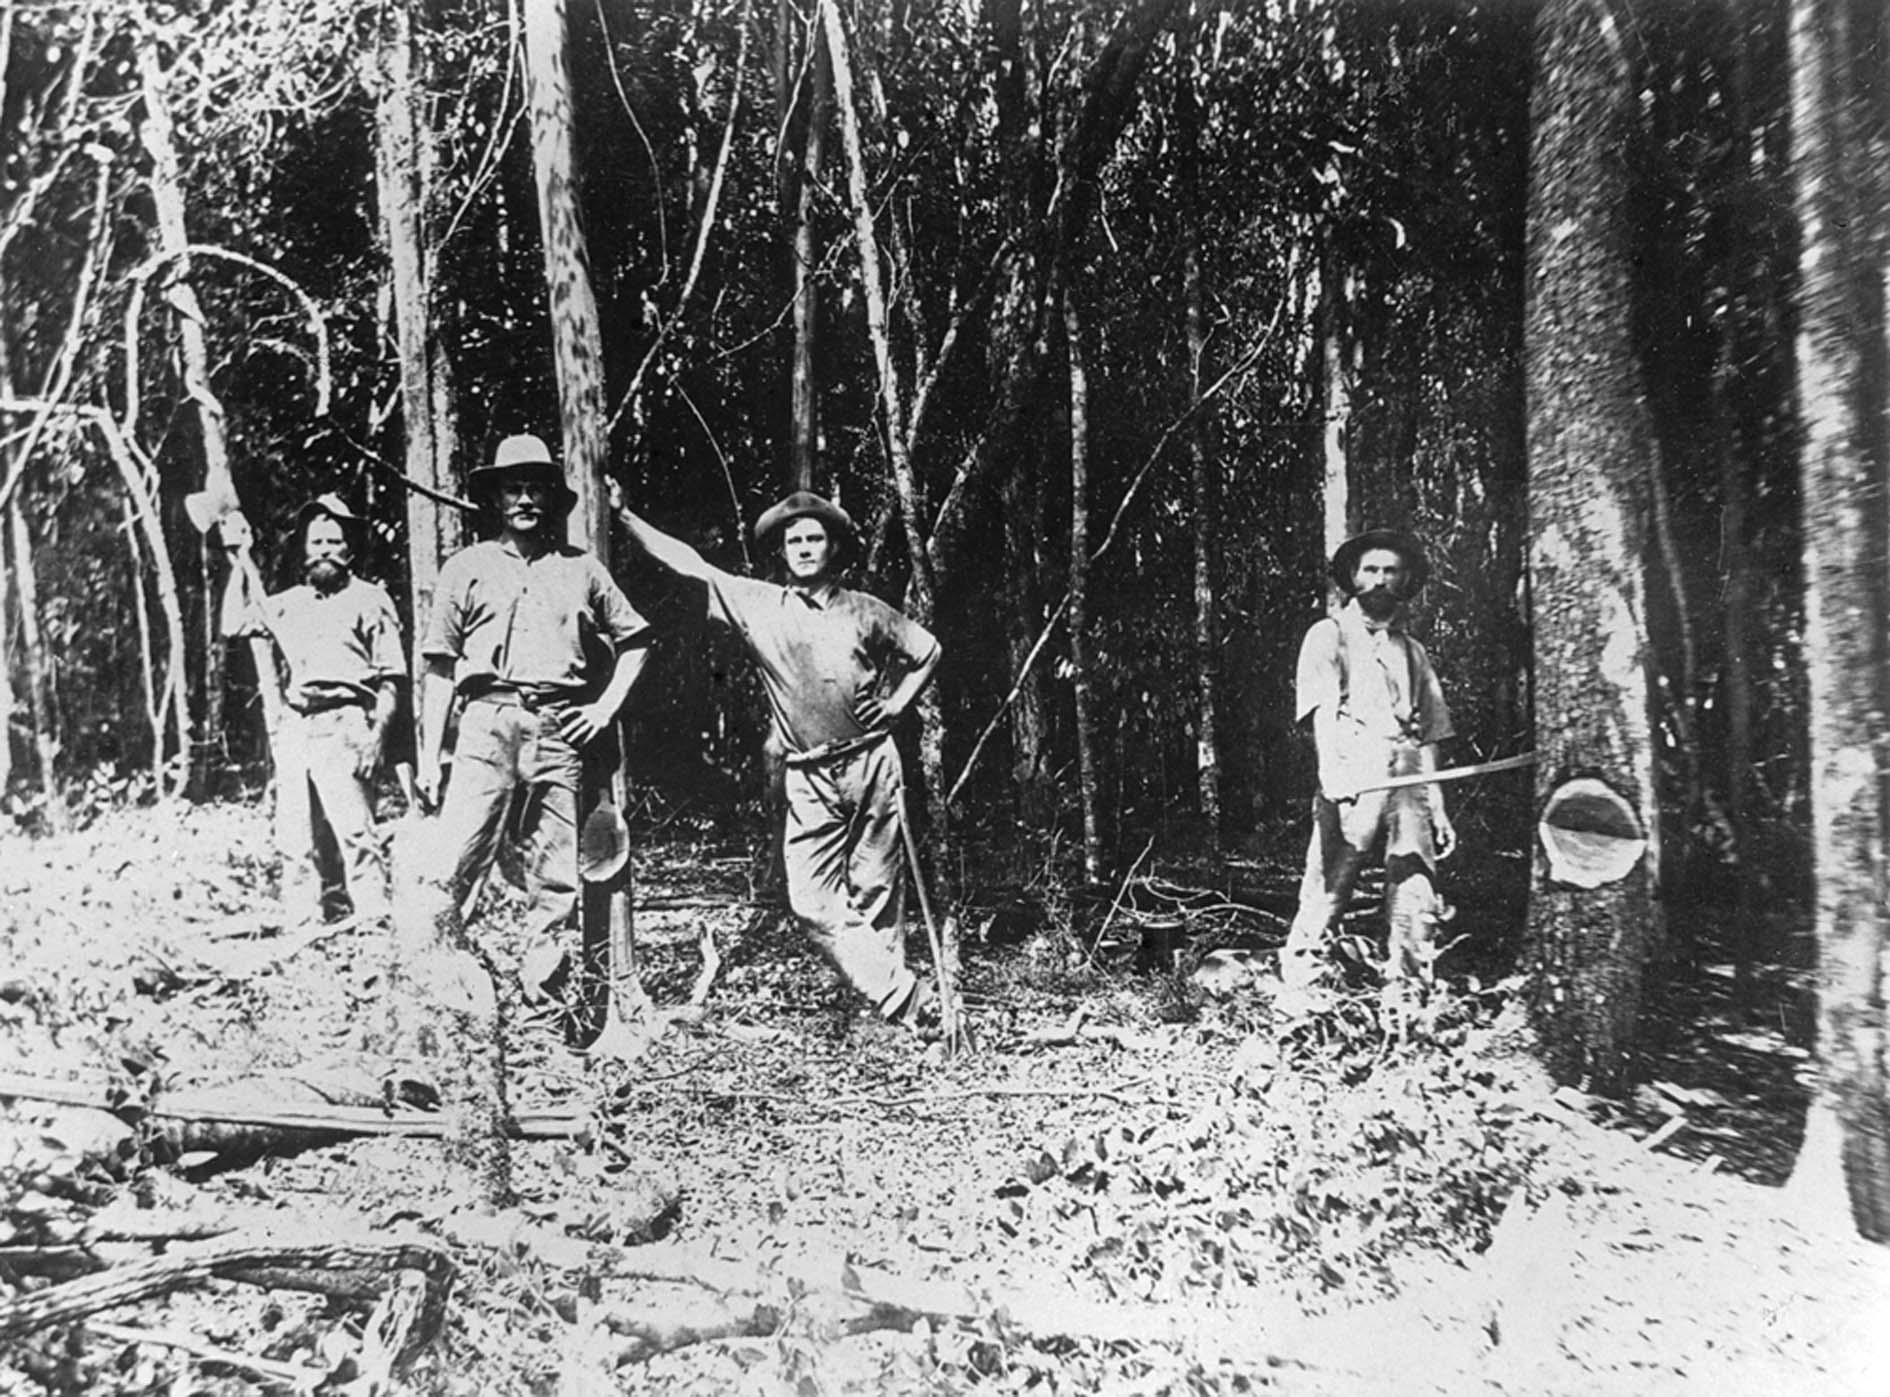 Clearing Rosewood Scrub, Ipswich, 1880s: Ipswich Libraries (spydus.com)